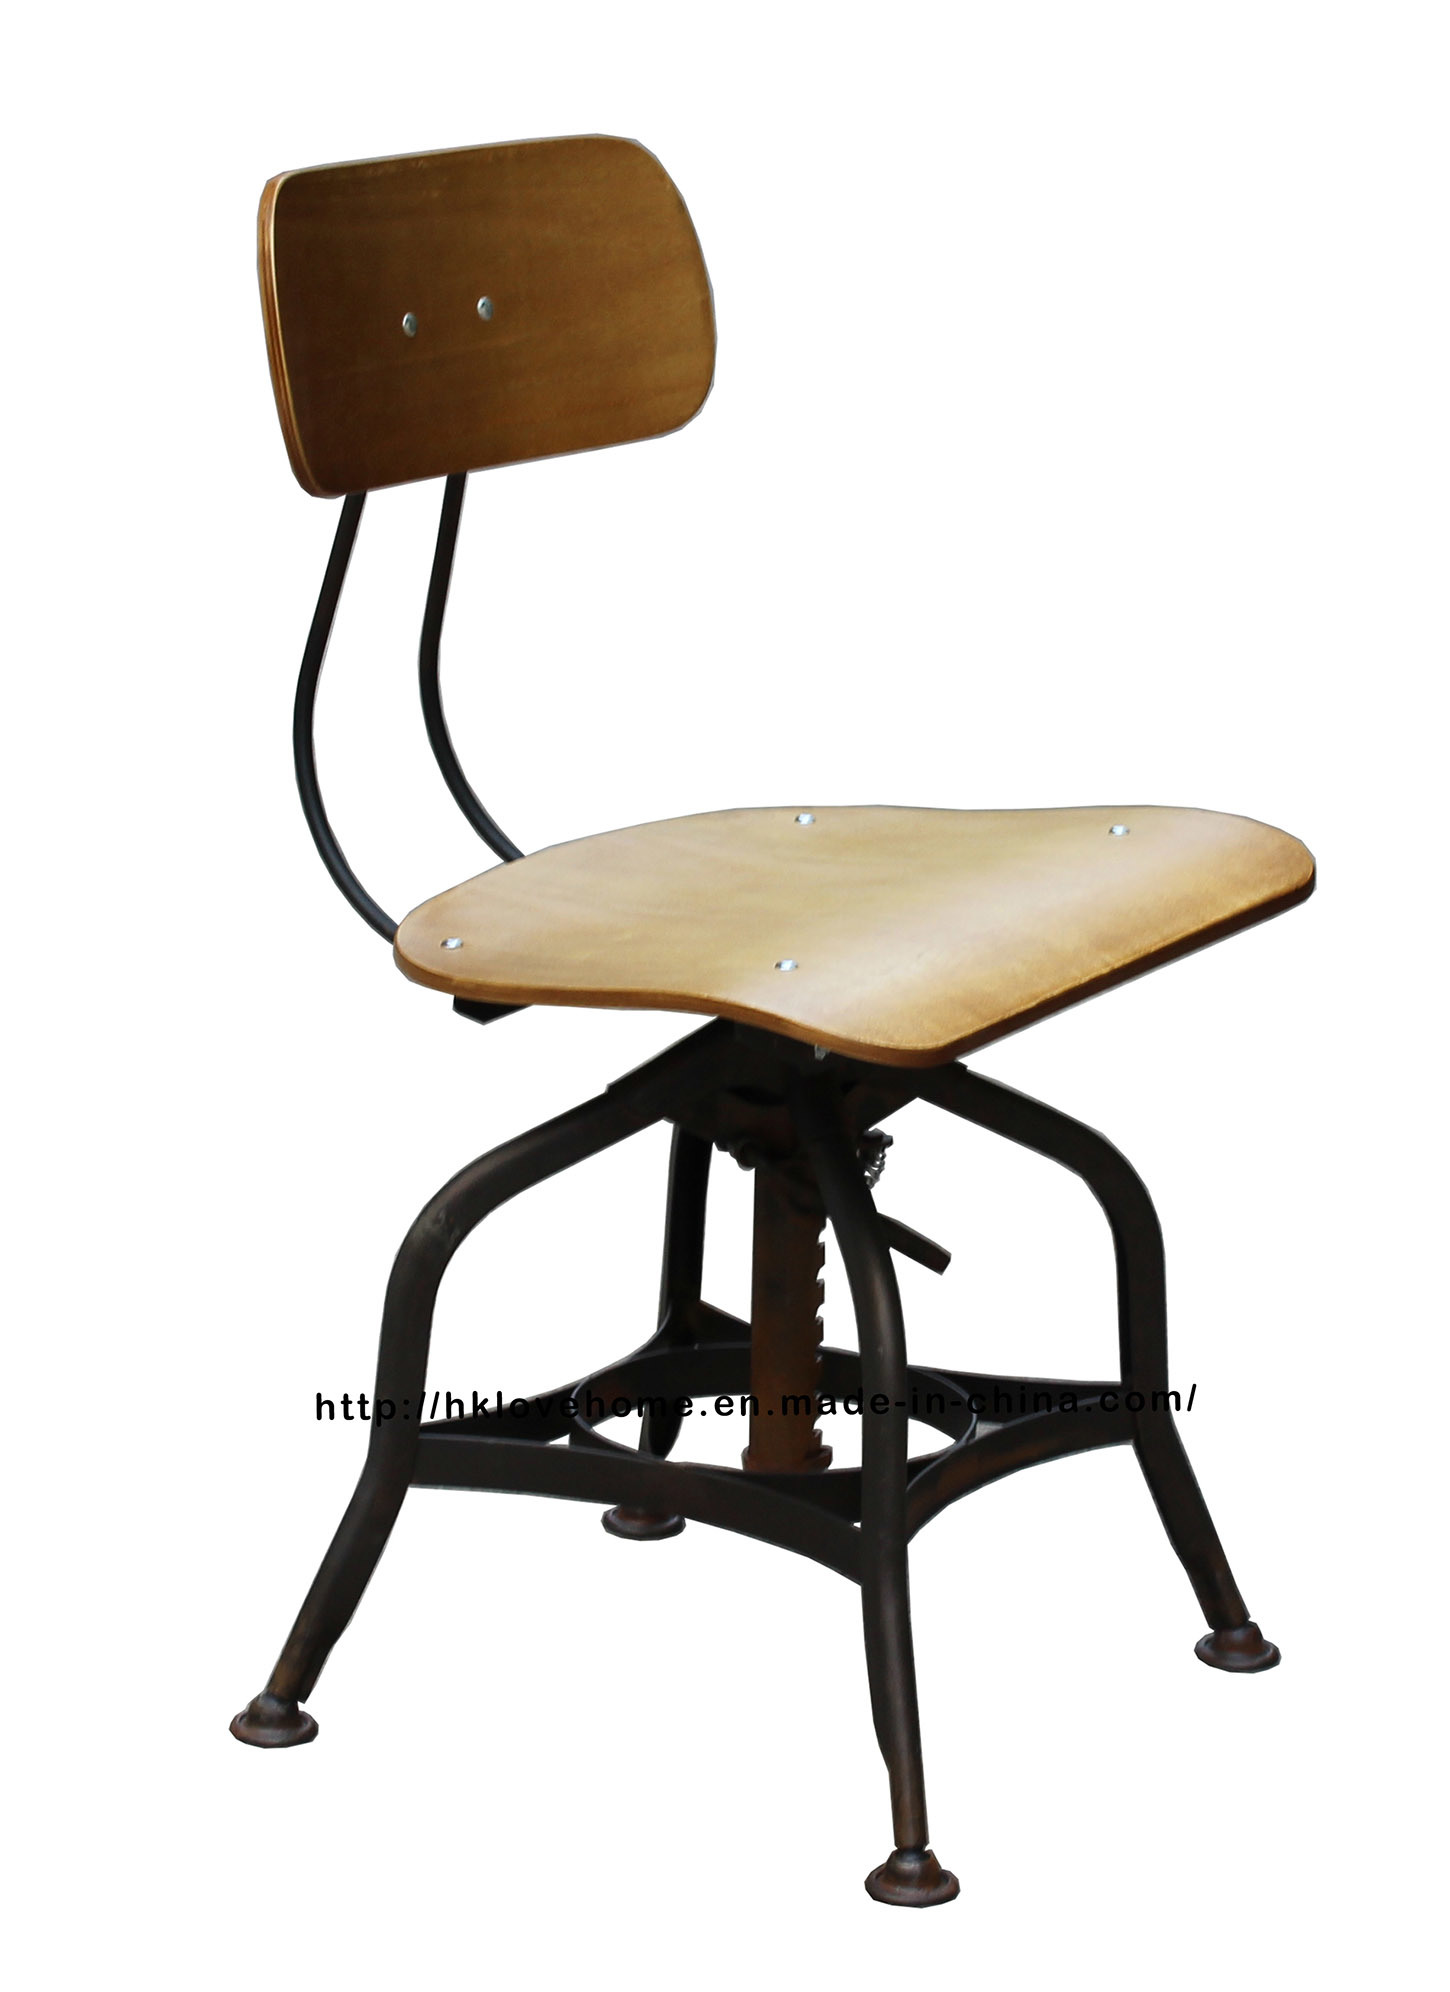 Classic Industrial Dining Vintage Toledo Wooden Chairs Bar Stools